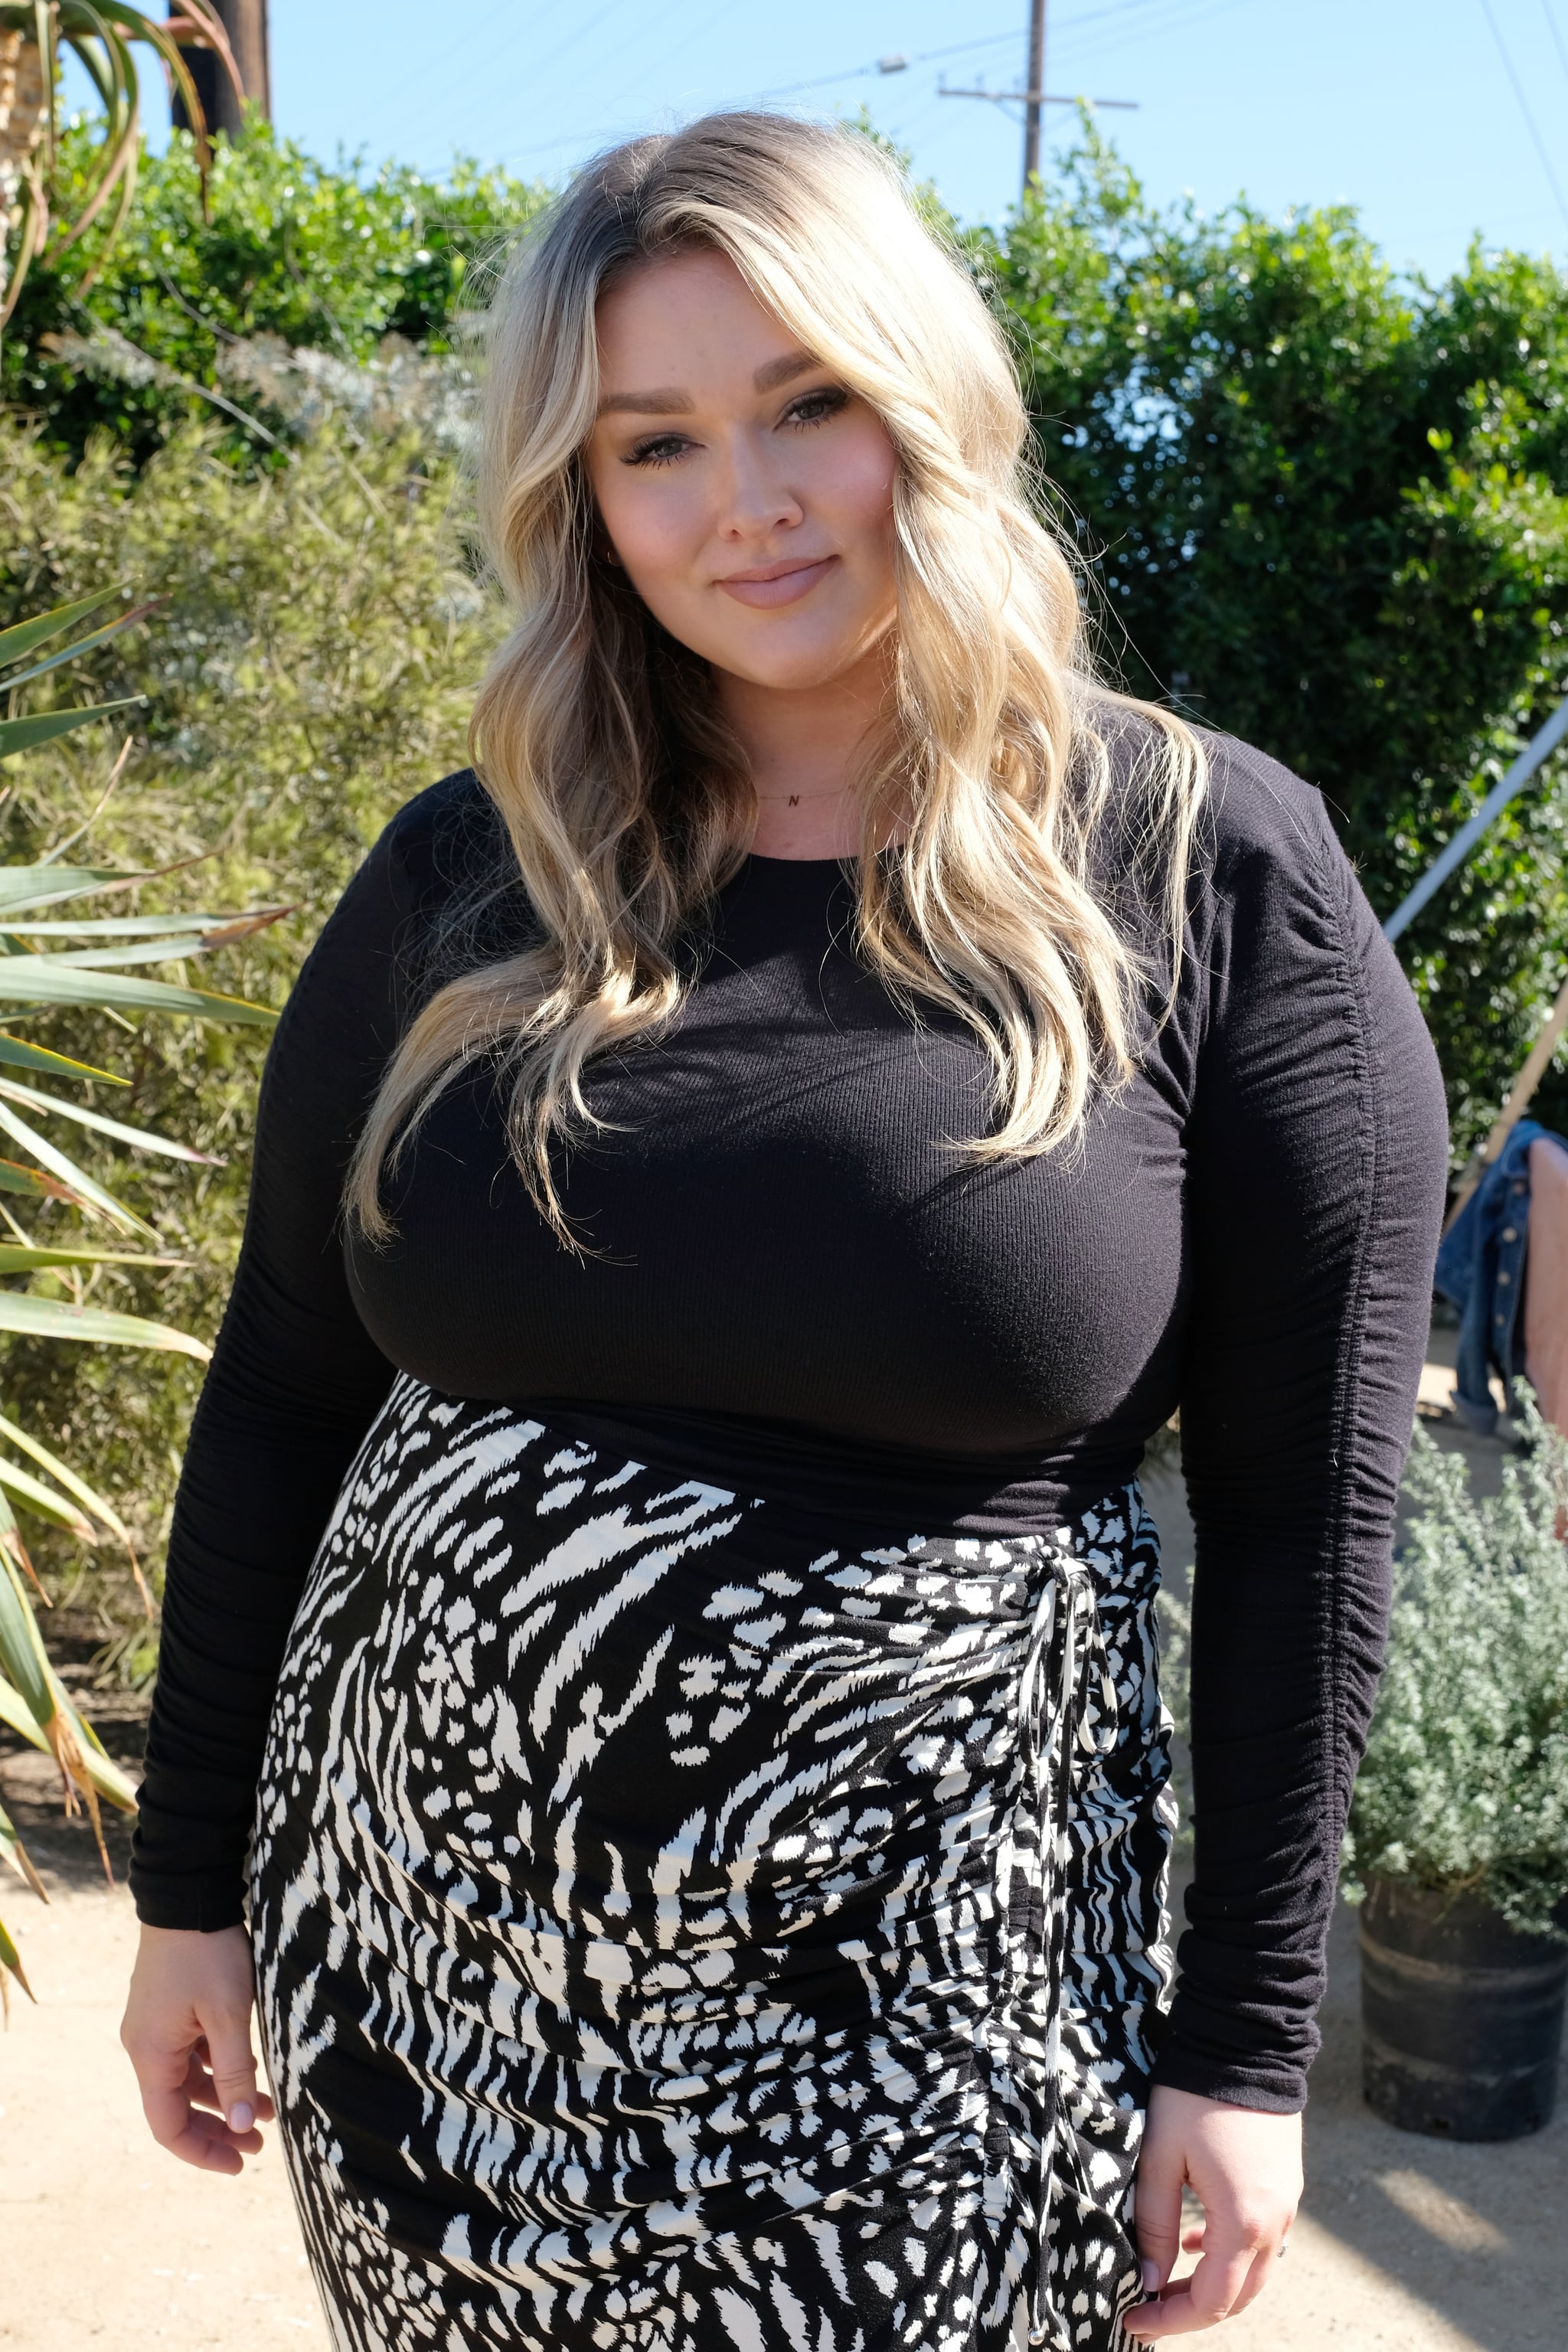 Plus-Size Hunter McGrady on Body Acceptance, Therapy | Fitness